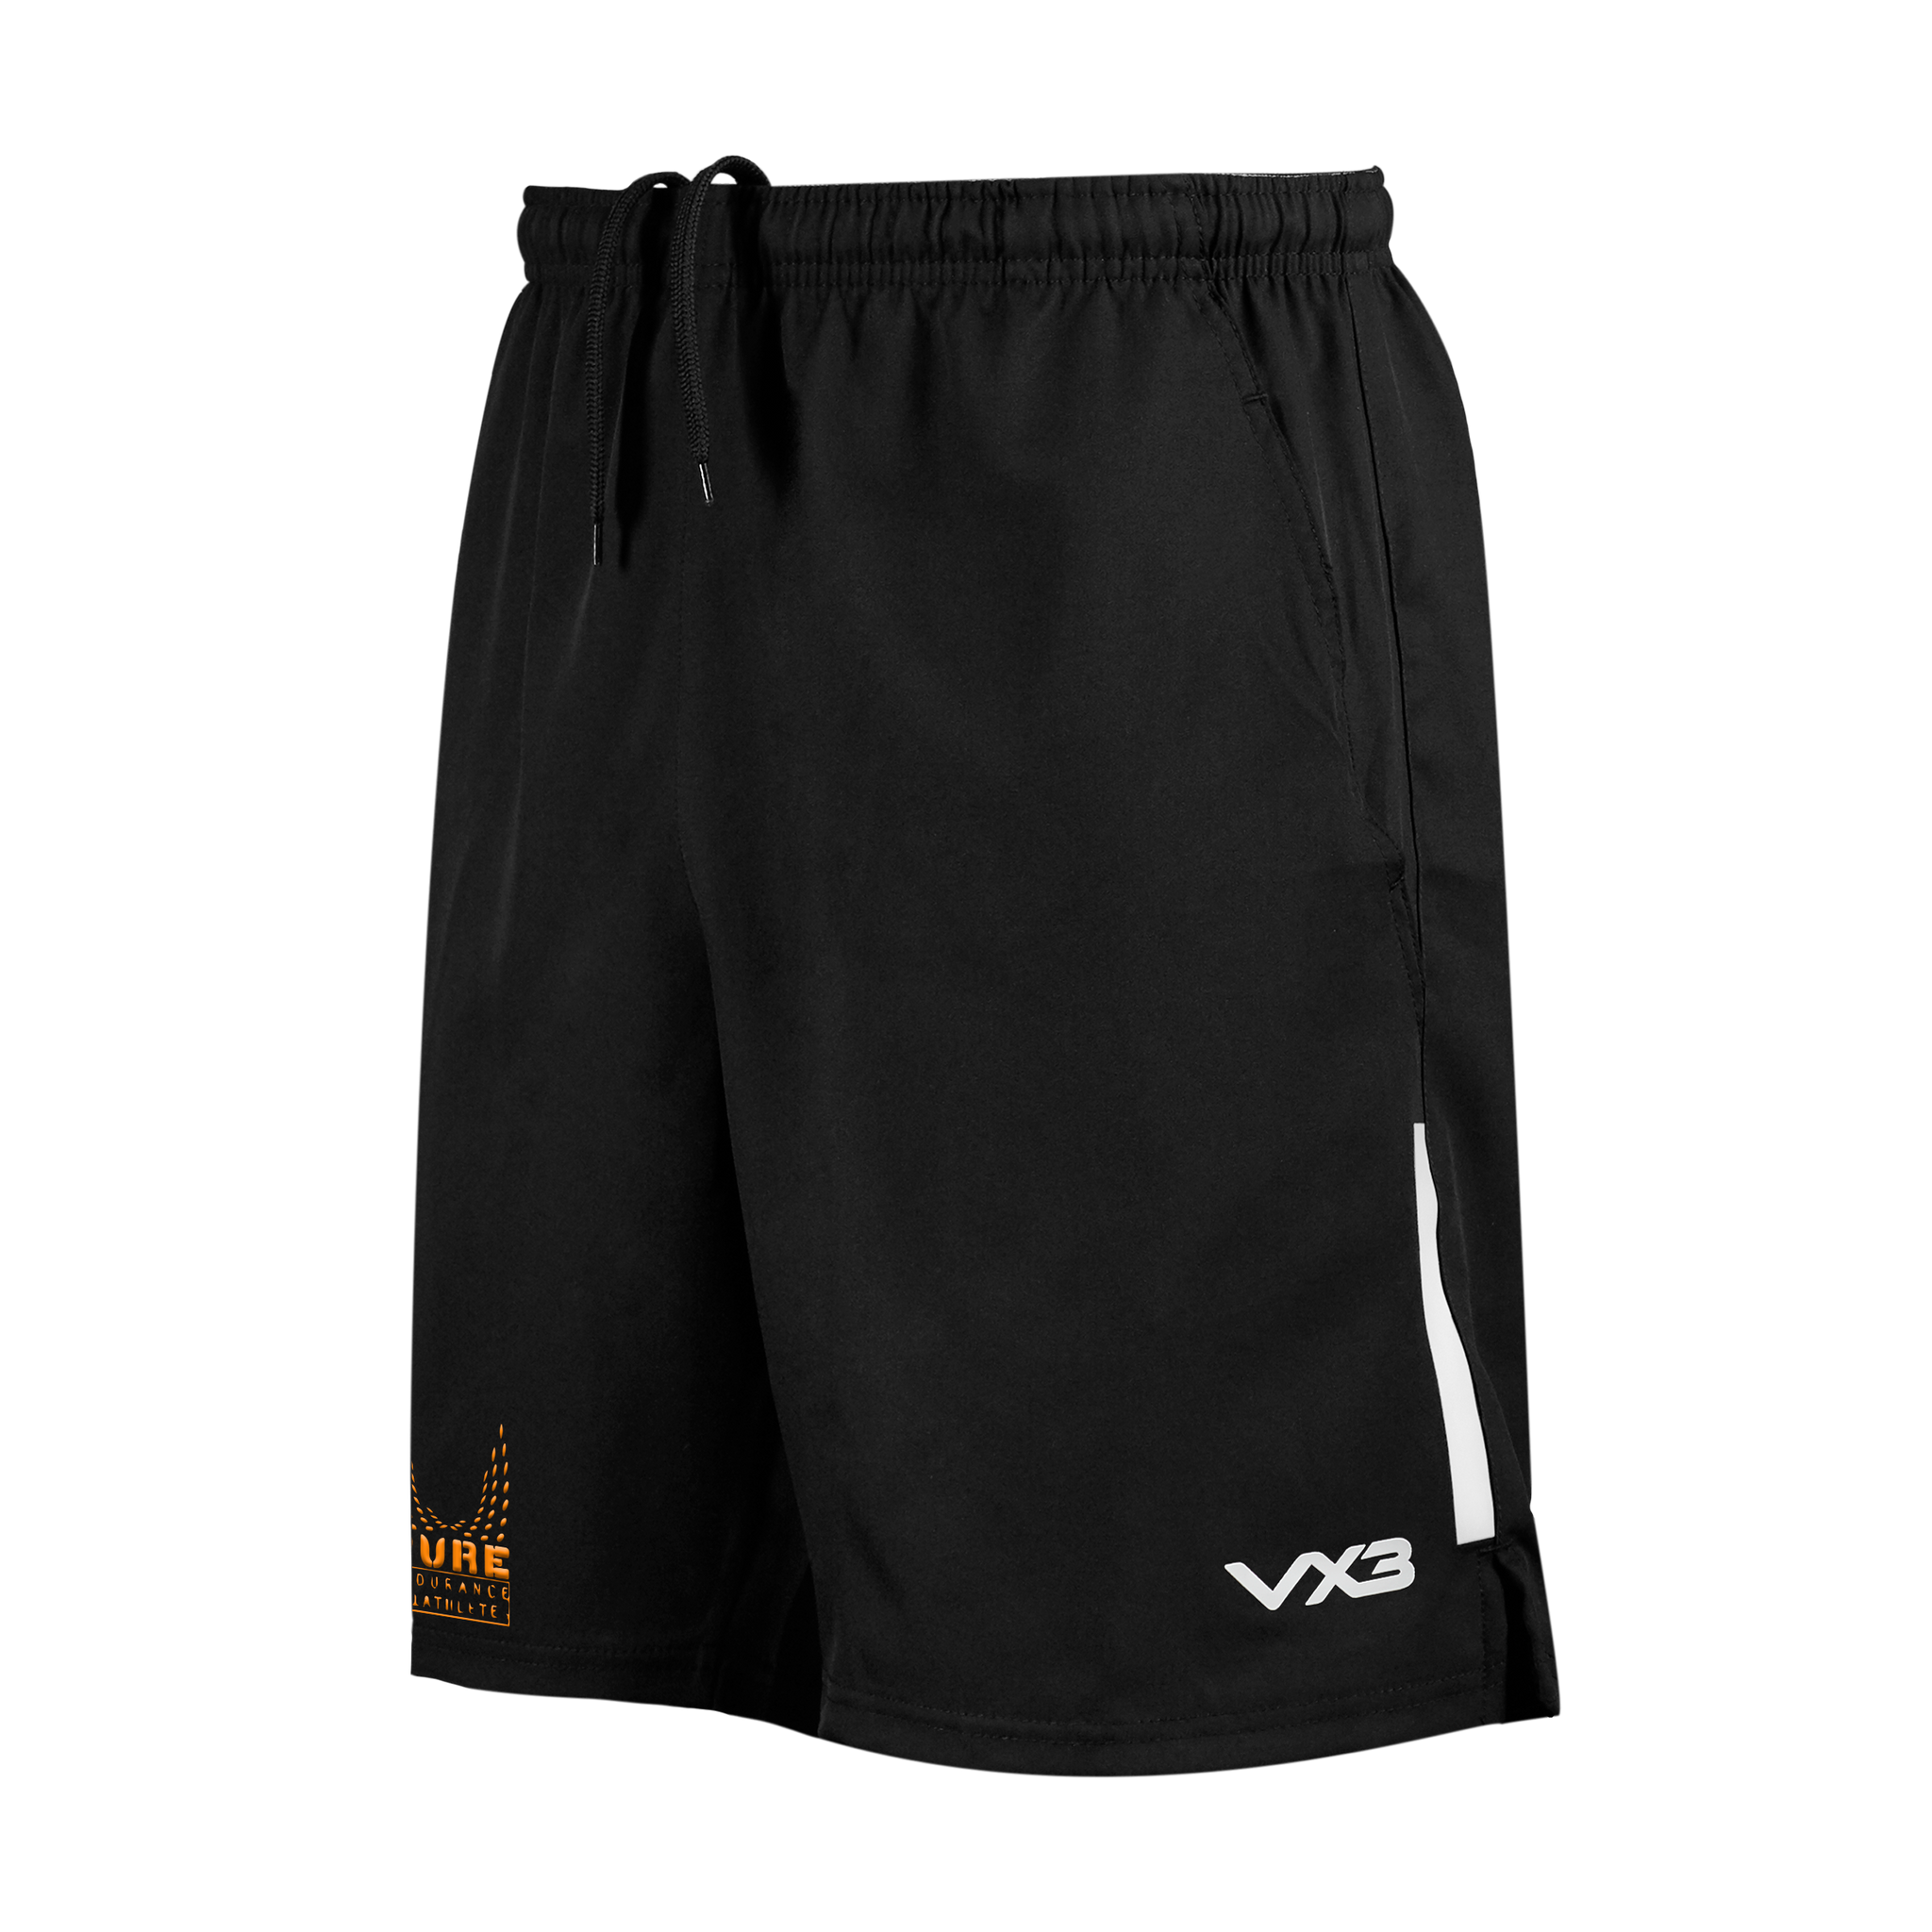 Pure Endurance Fortis Youth Travel Shorts